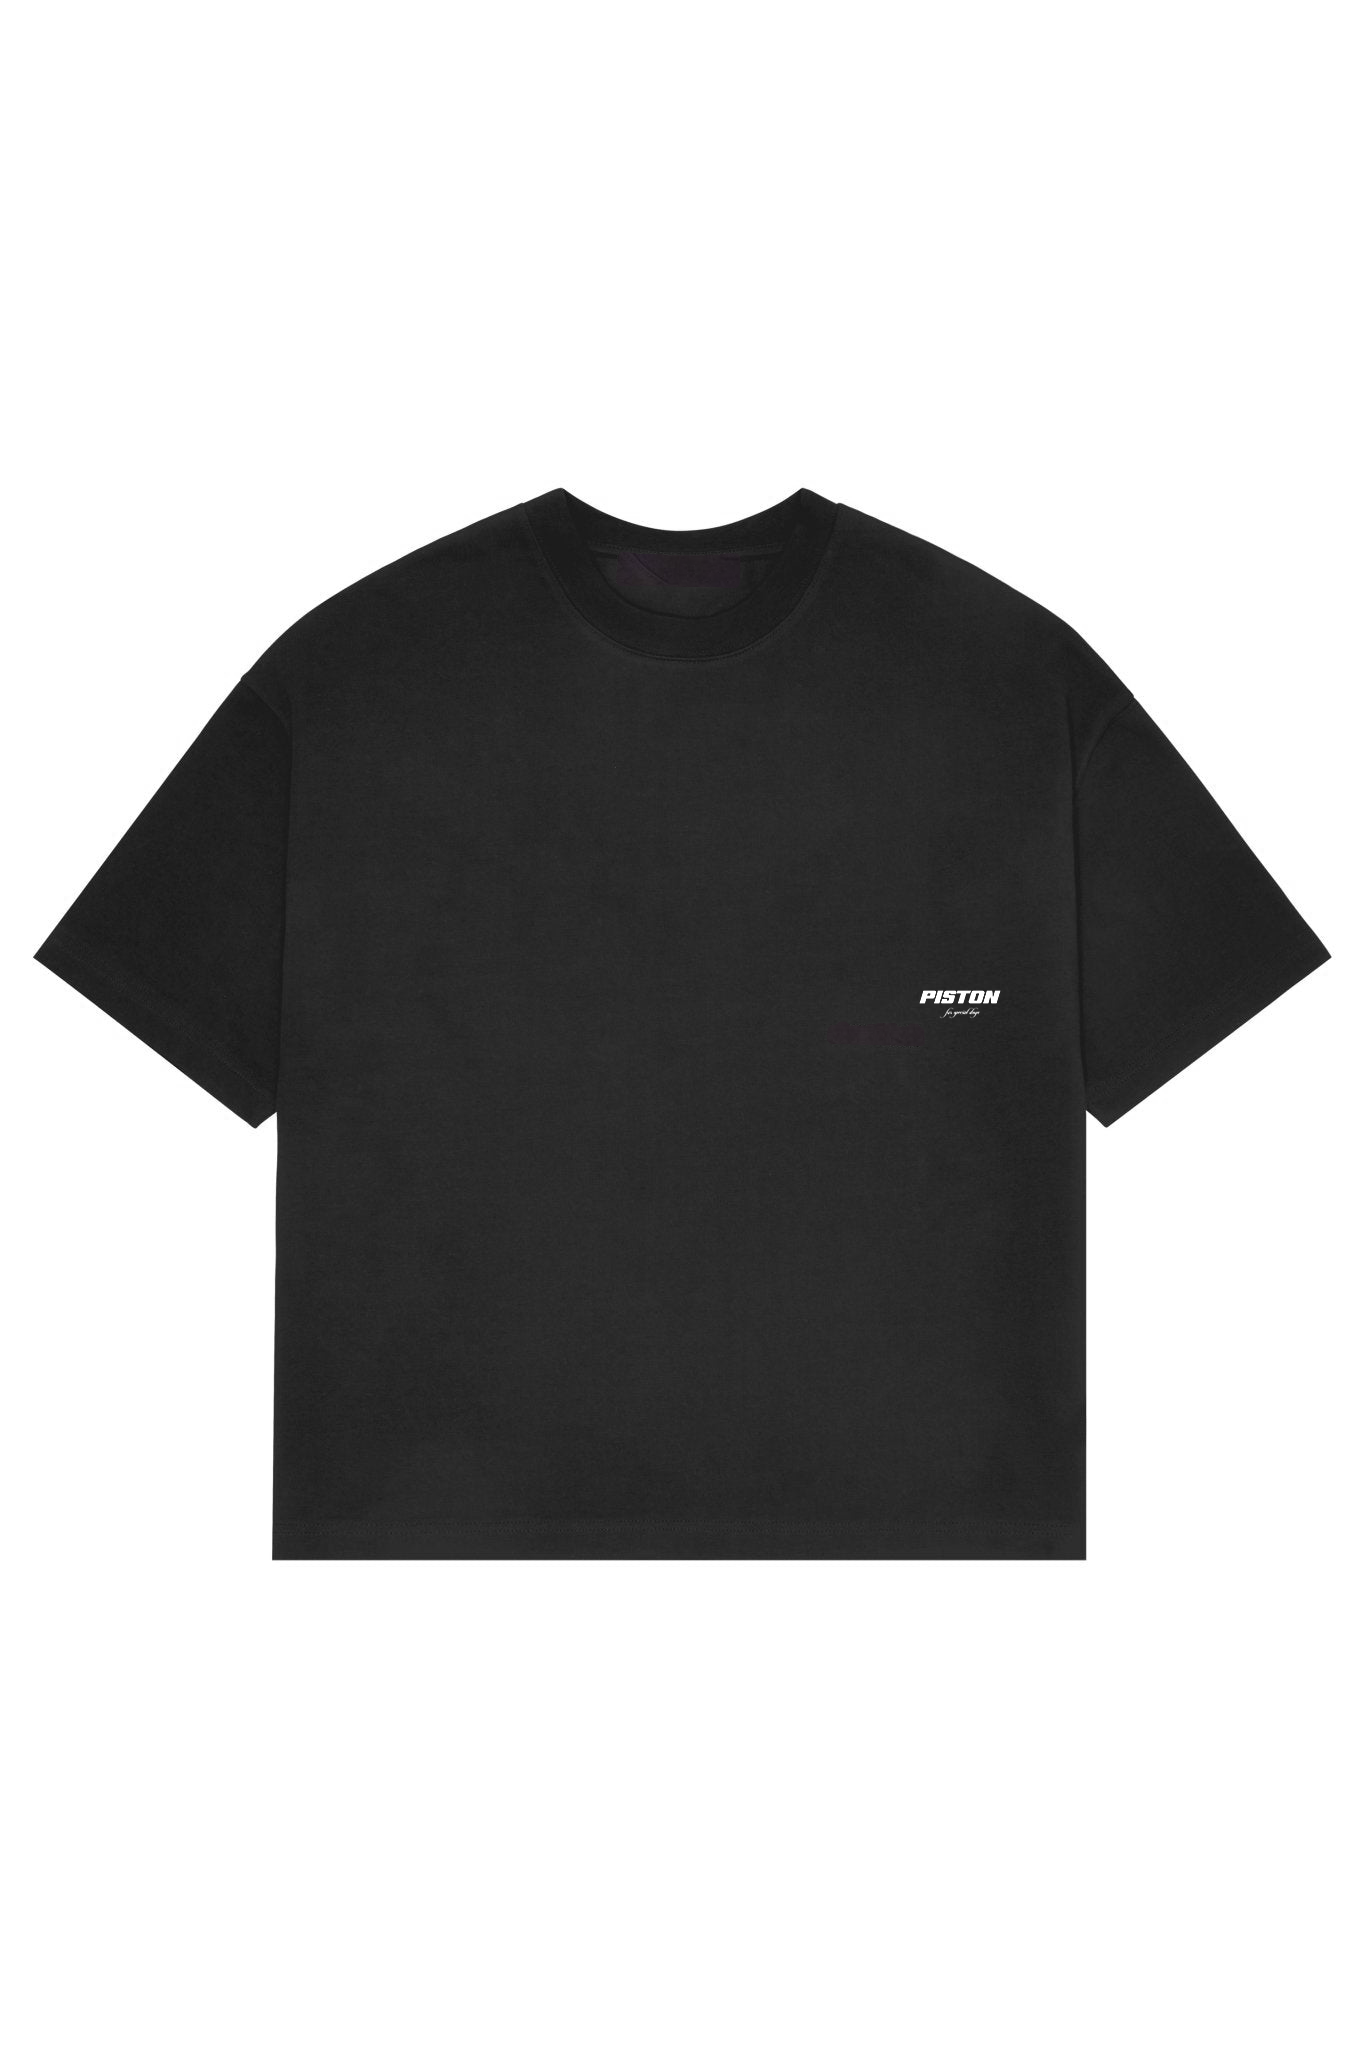 FOR SPECIAL DAYS - T SHIRT BLACK OVERSIZED